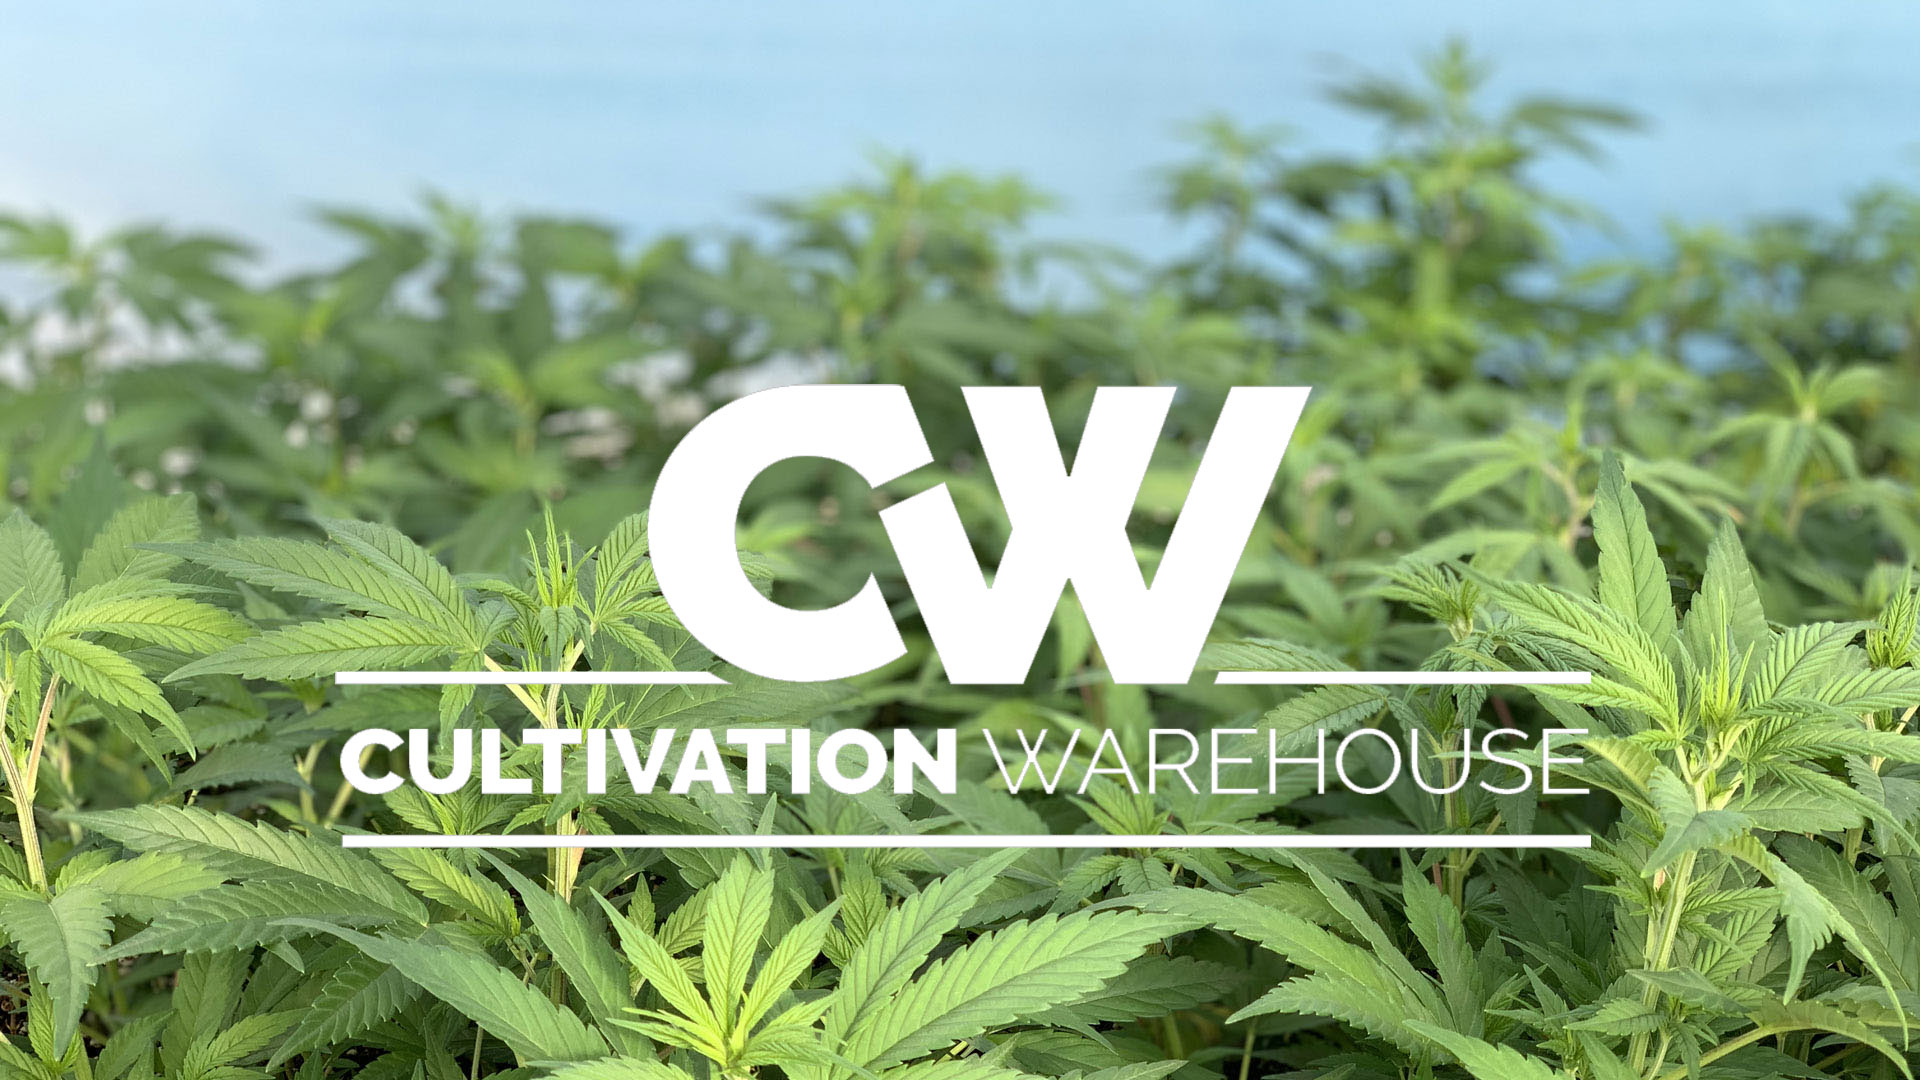 New branding for a New Era of CW